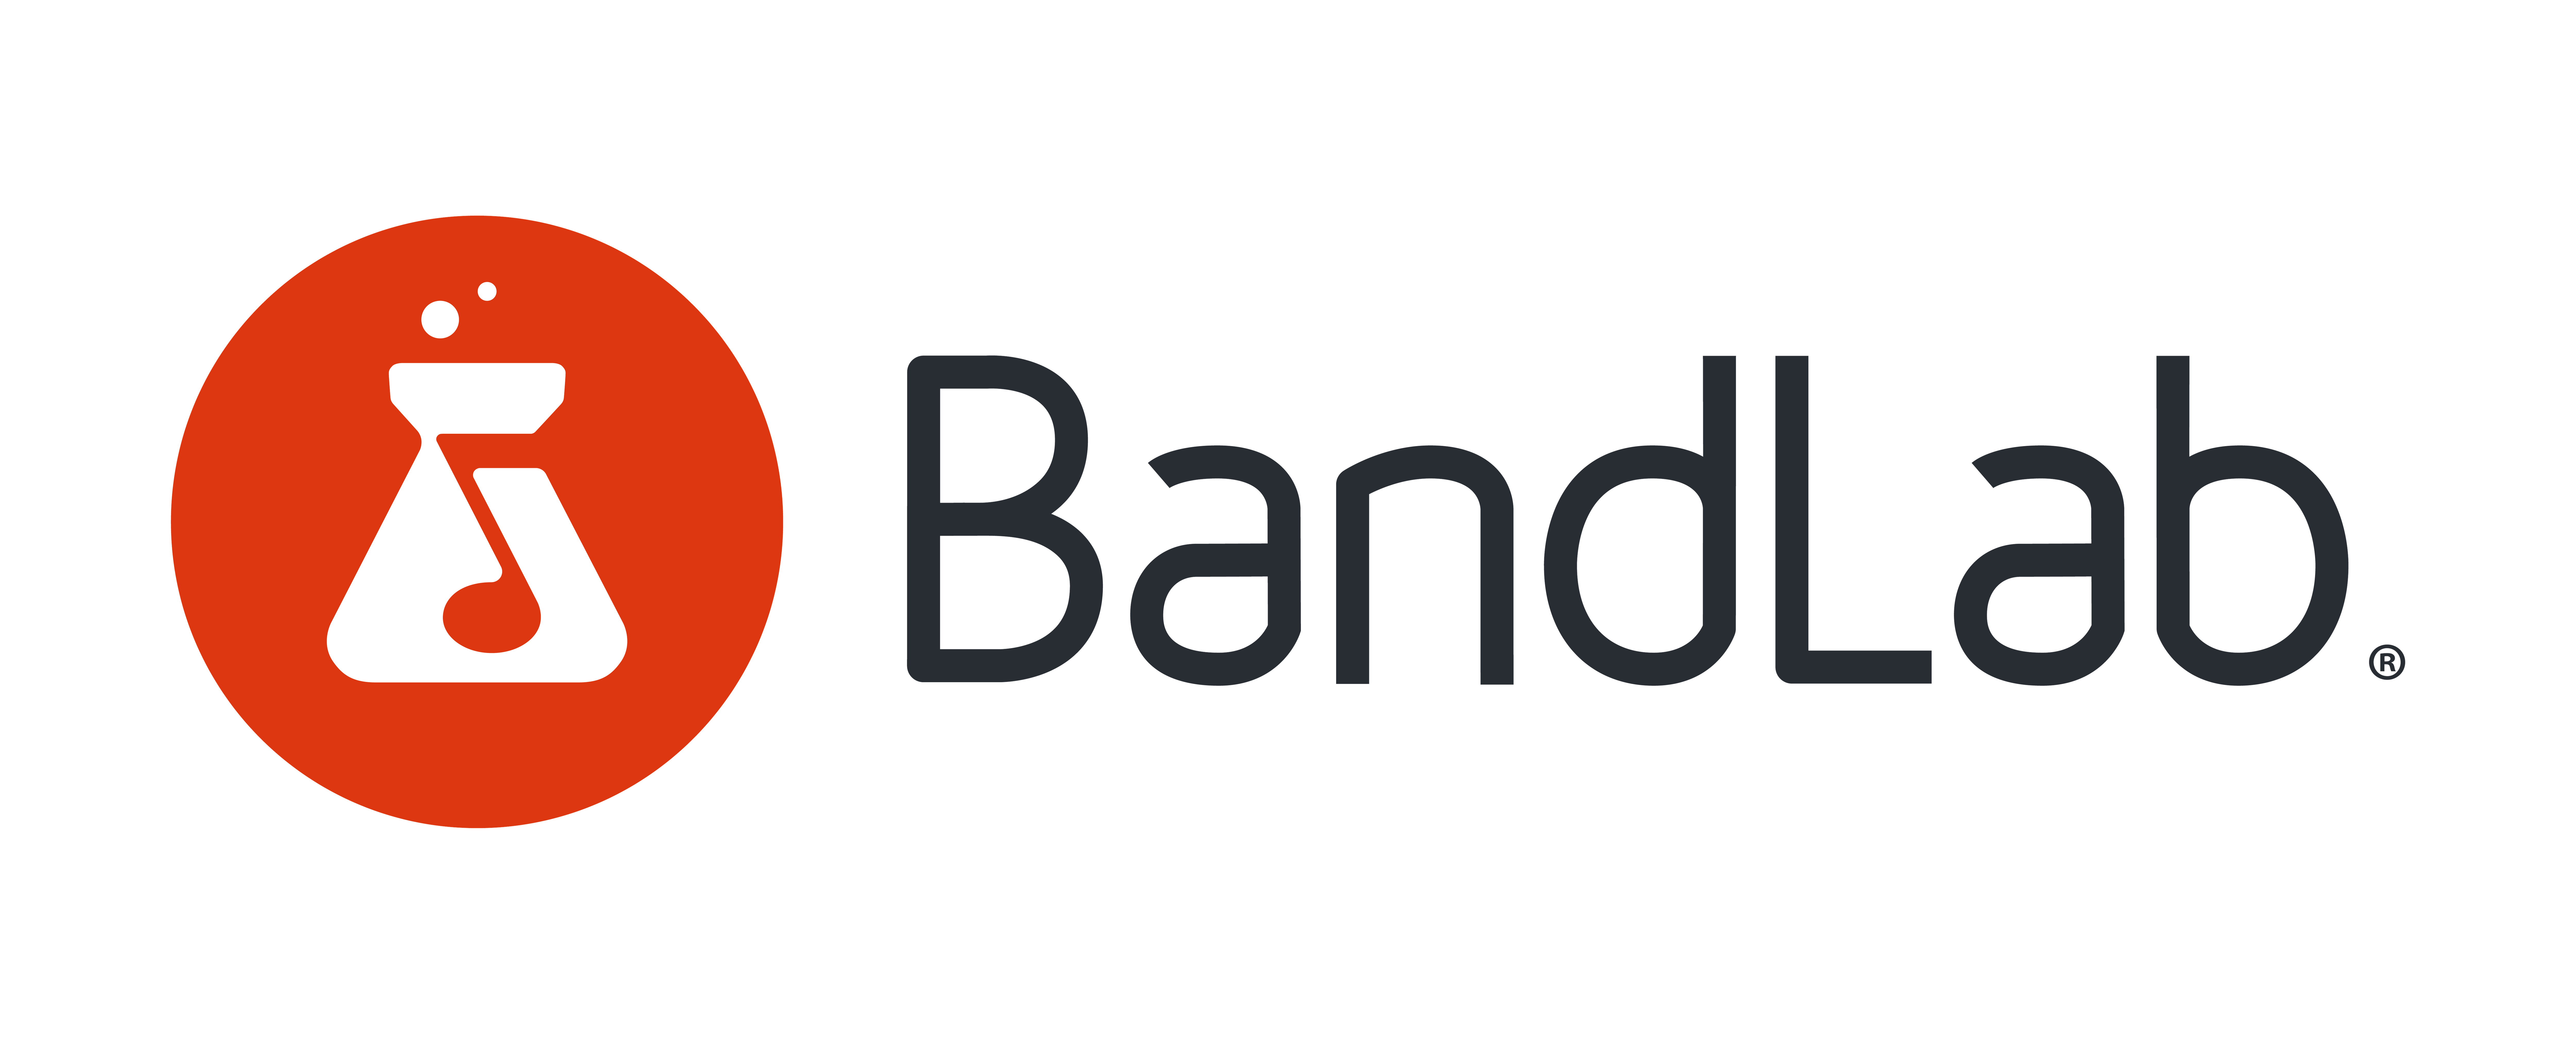 Are platforms like BandLab changing the world of music production?